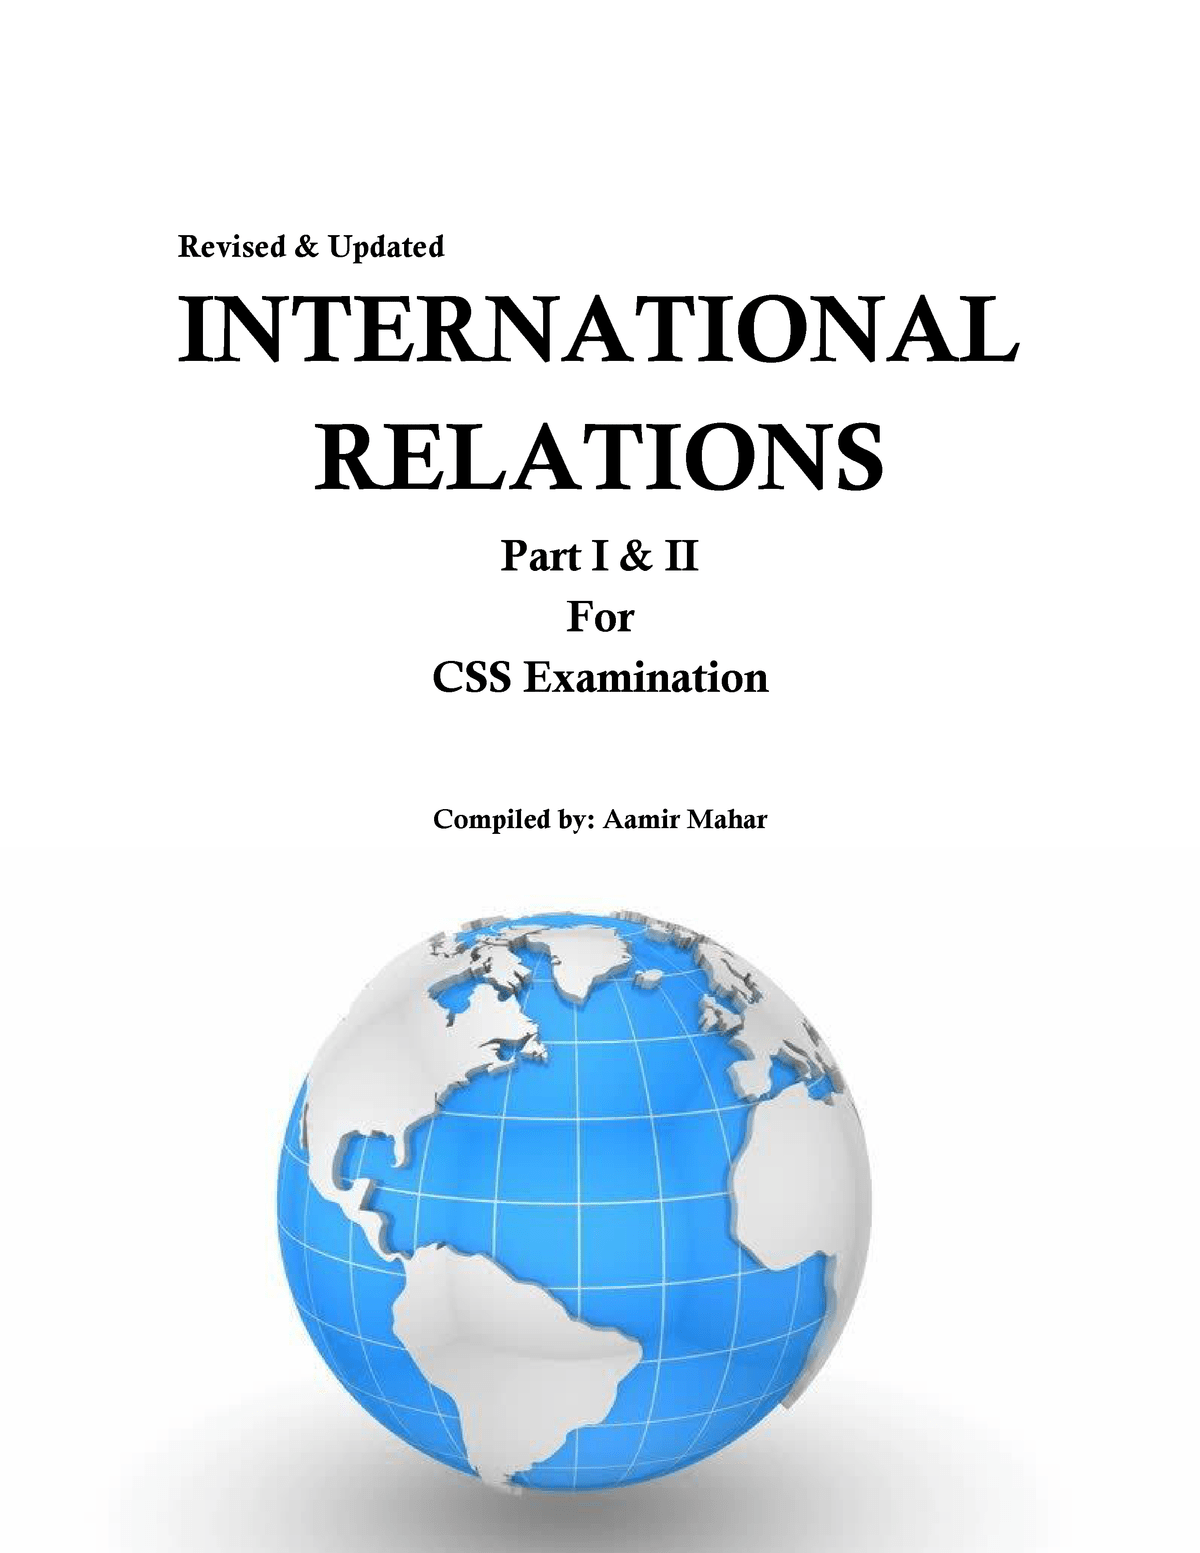 International relations (I.R) Notes By Sir Amir Mahir for CSS PMS.